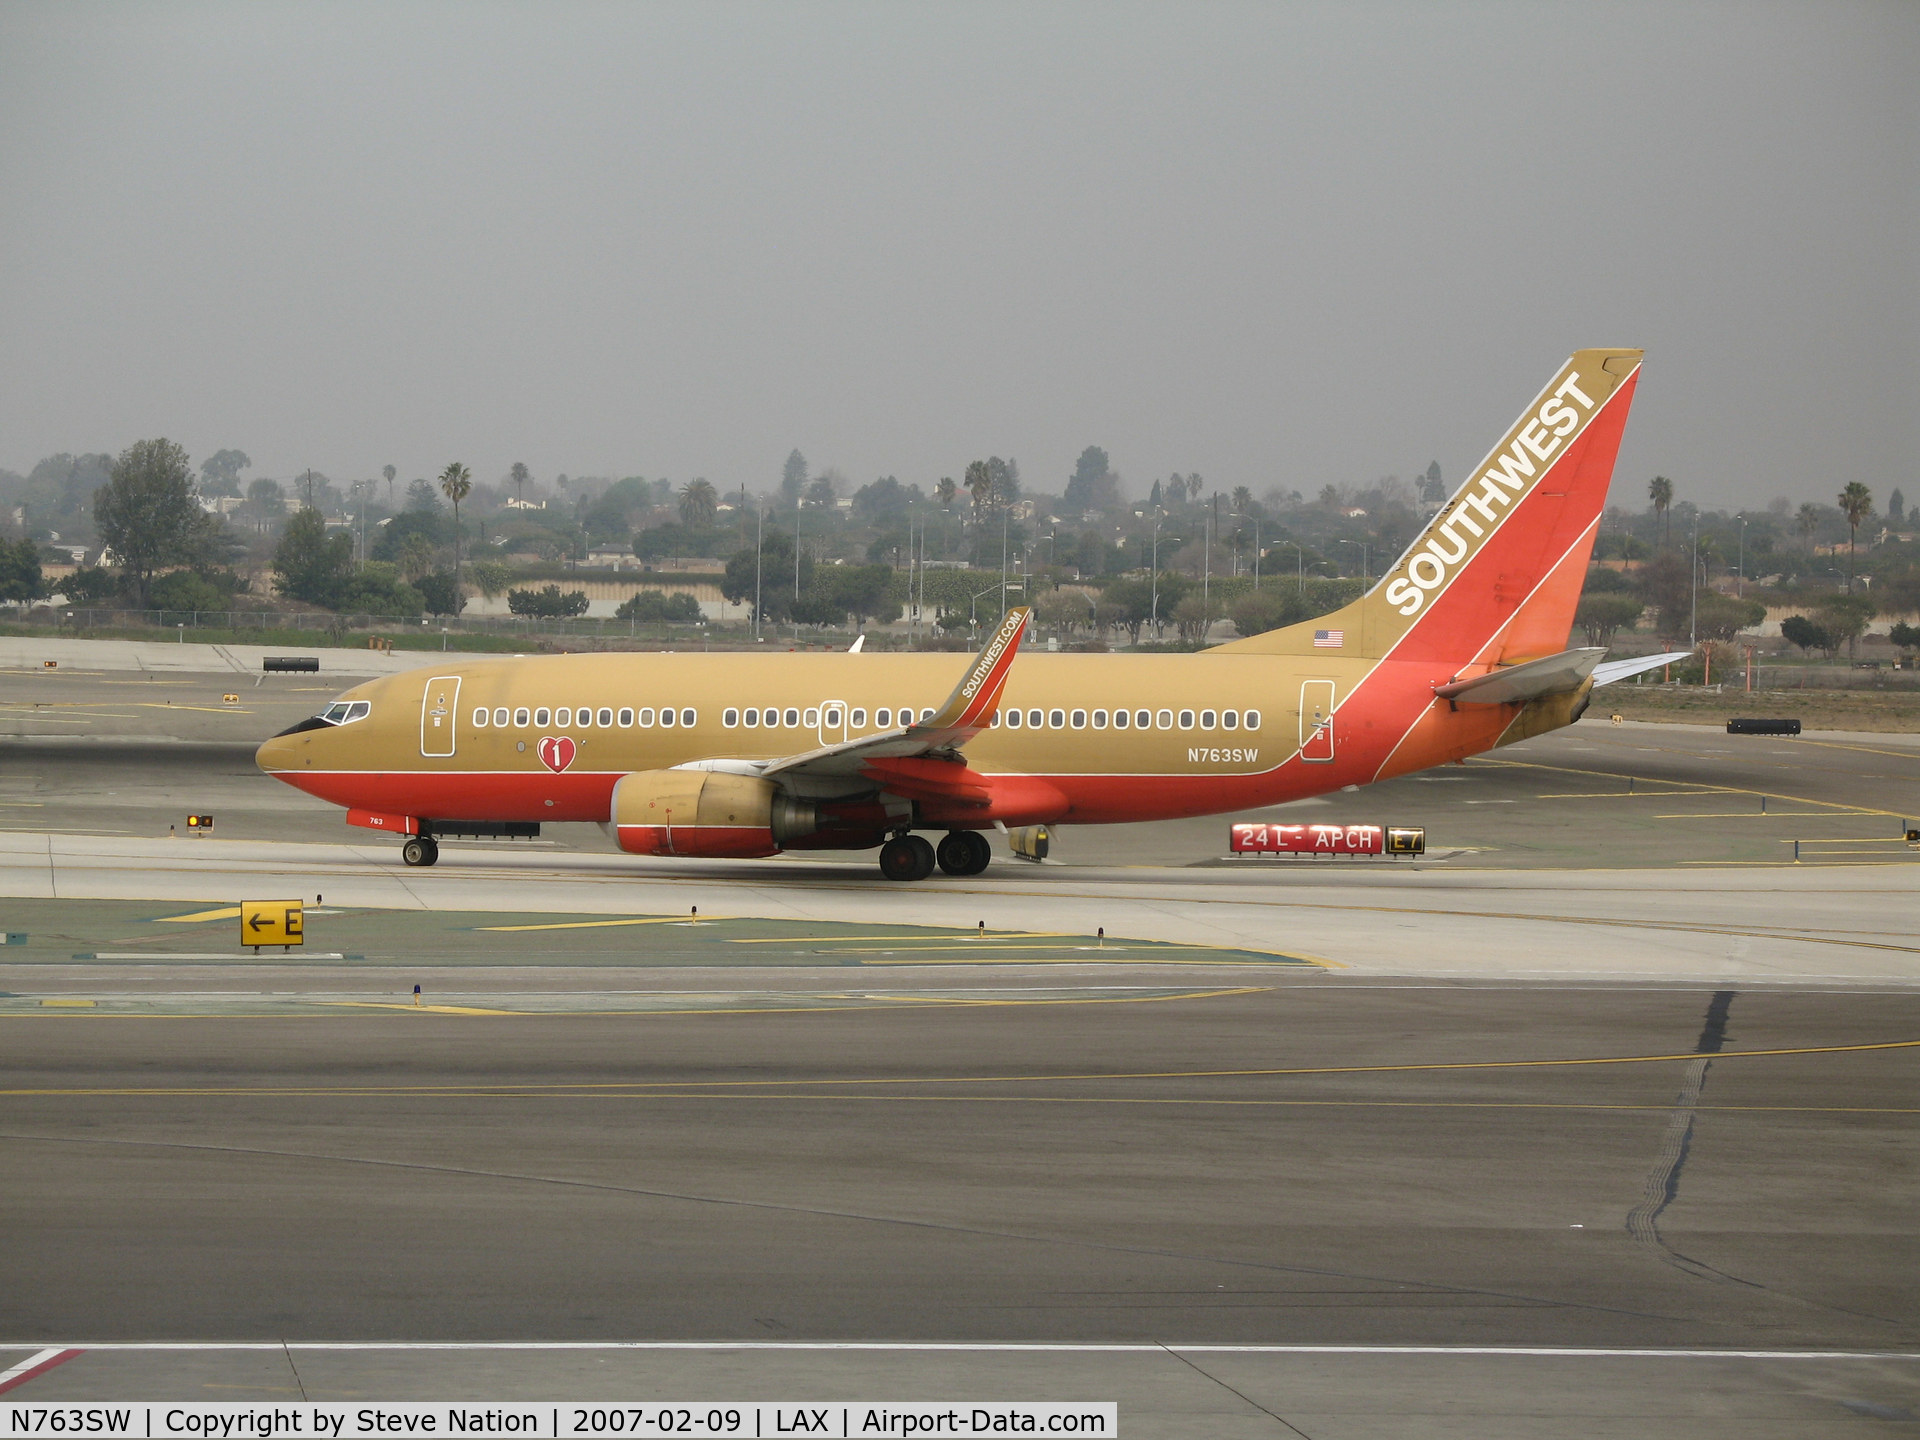 N763SW, 2000 Boeing 737-7H4 C/N 27877, Southwest 737-7H4 in old colors with winglets taxying @ LAX